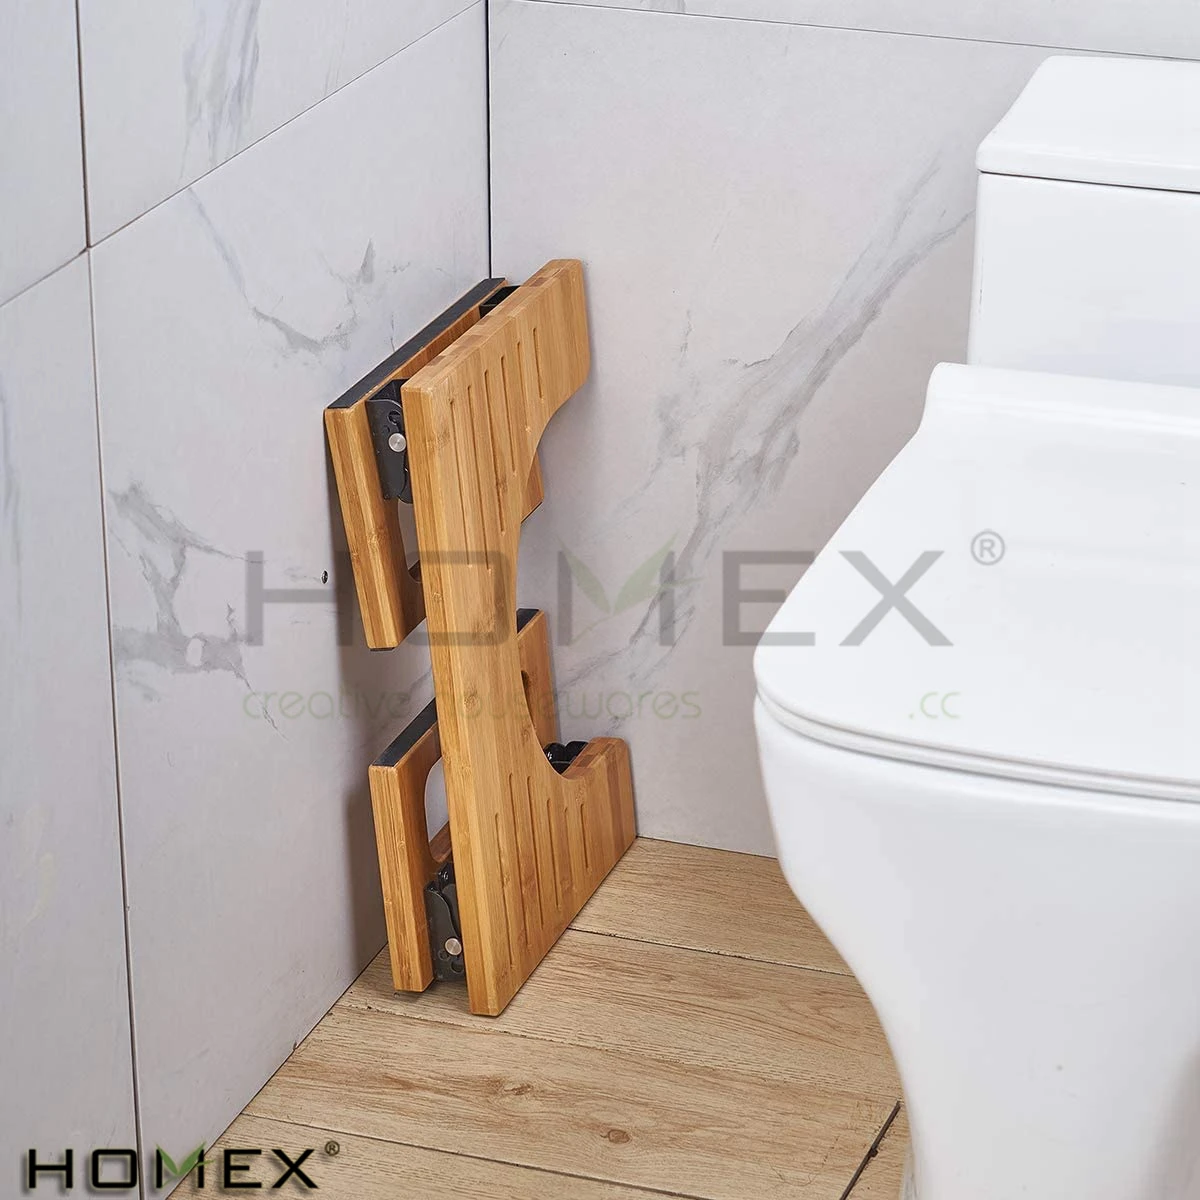 Bamboo Bathroom Squatting Toilet Stool Adjustable Bamboo Portable	Squatty Potty for Defecation